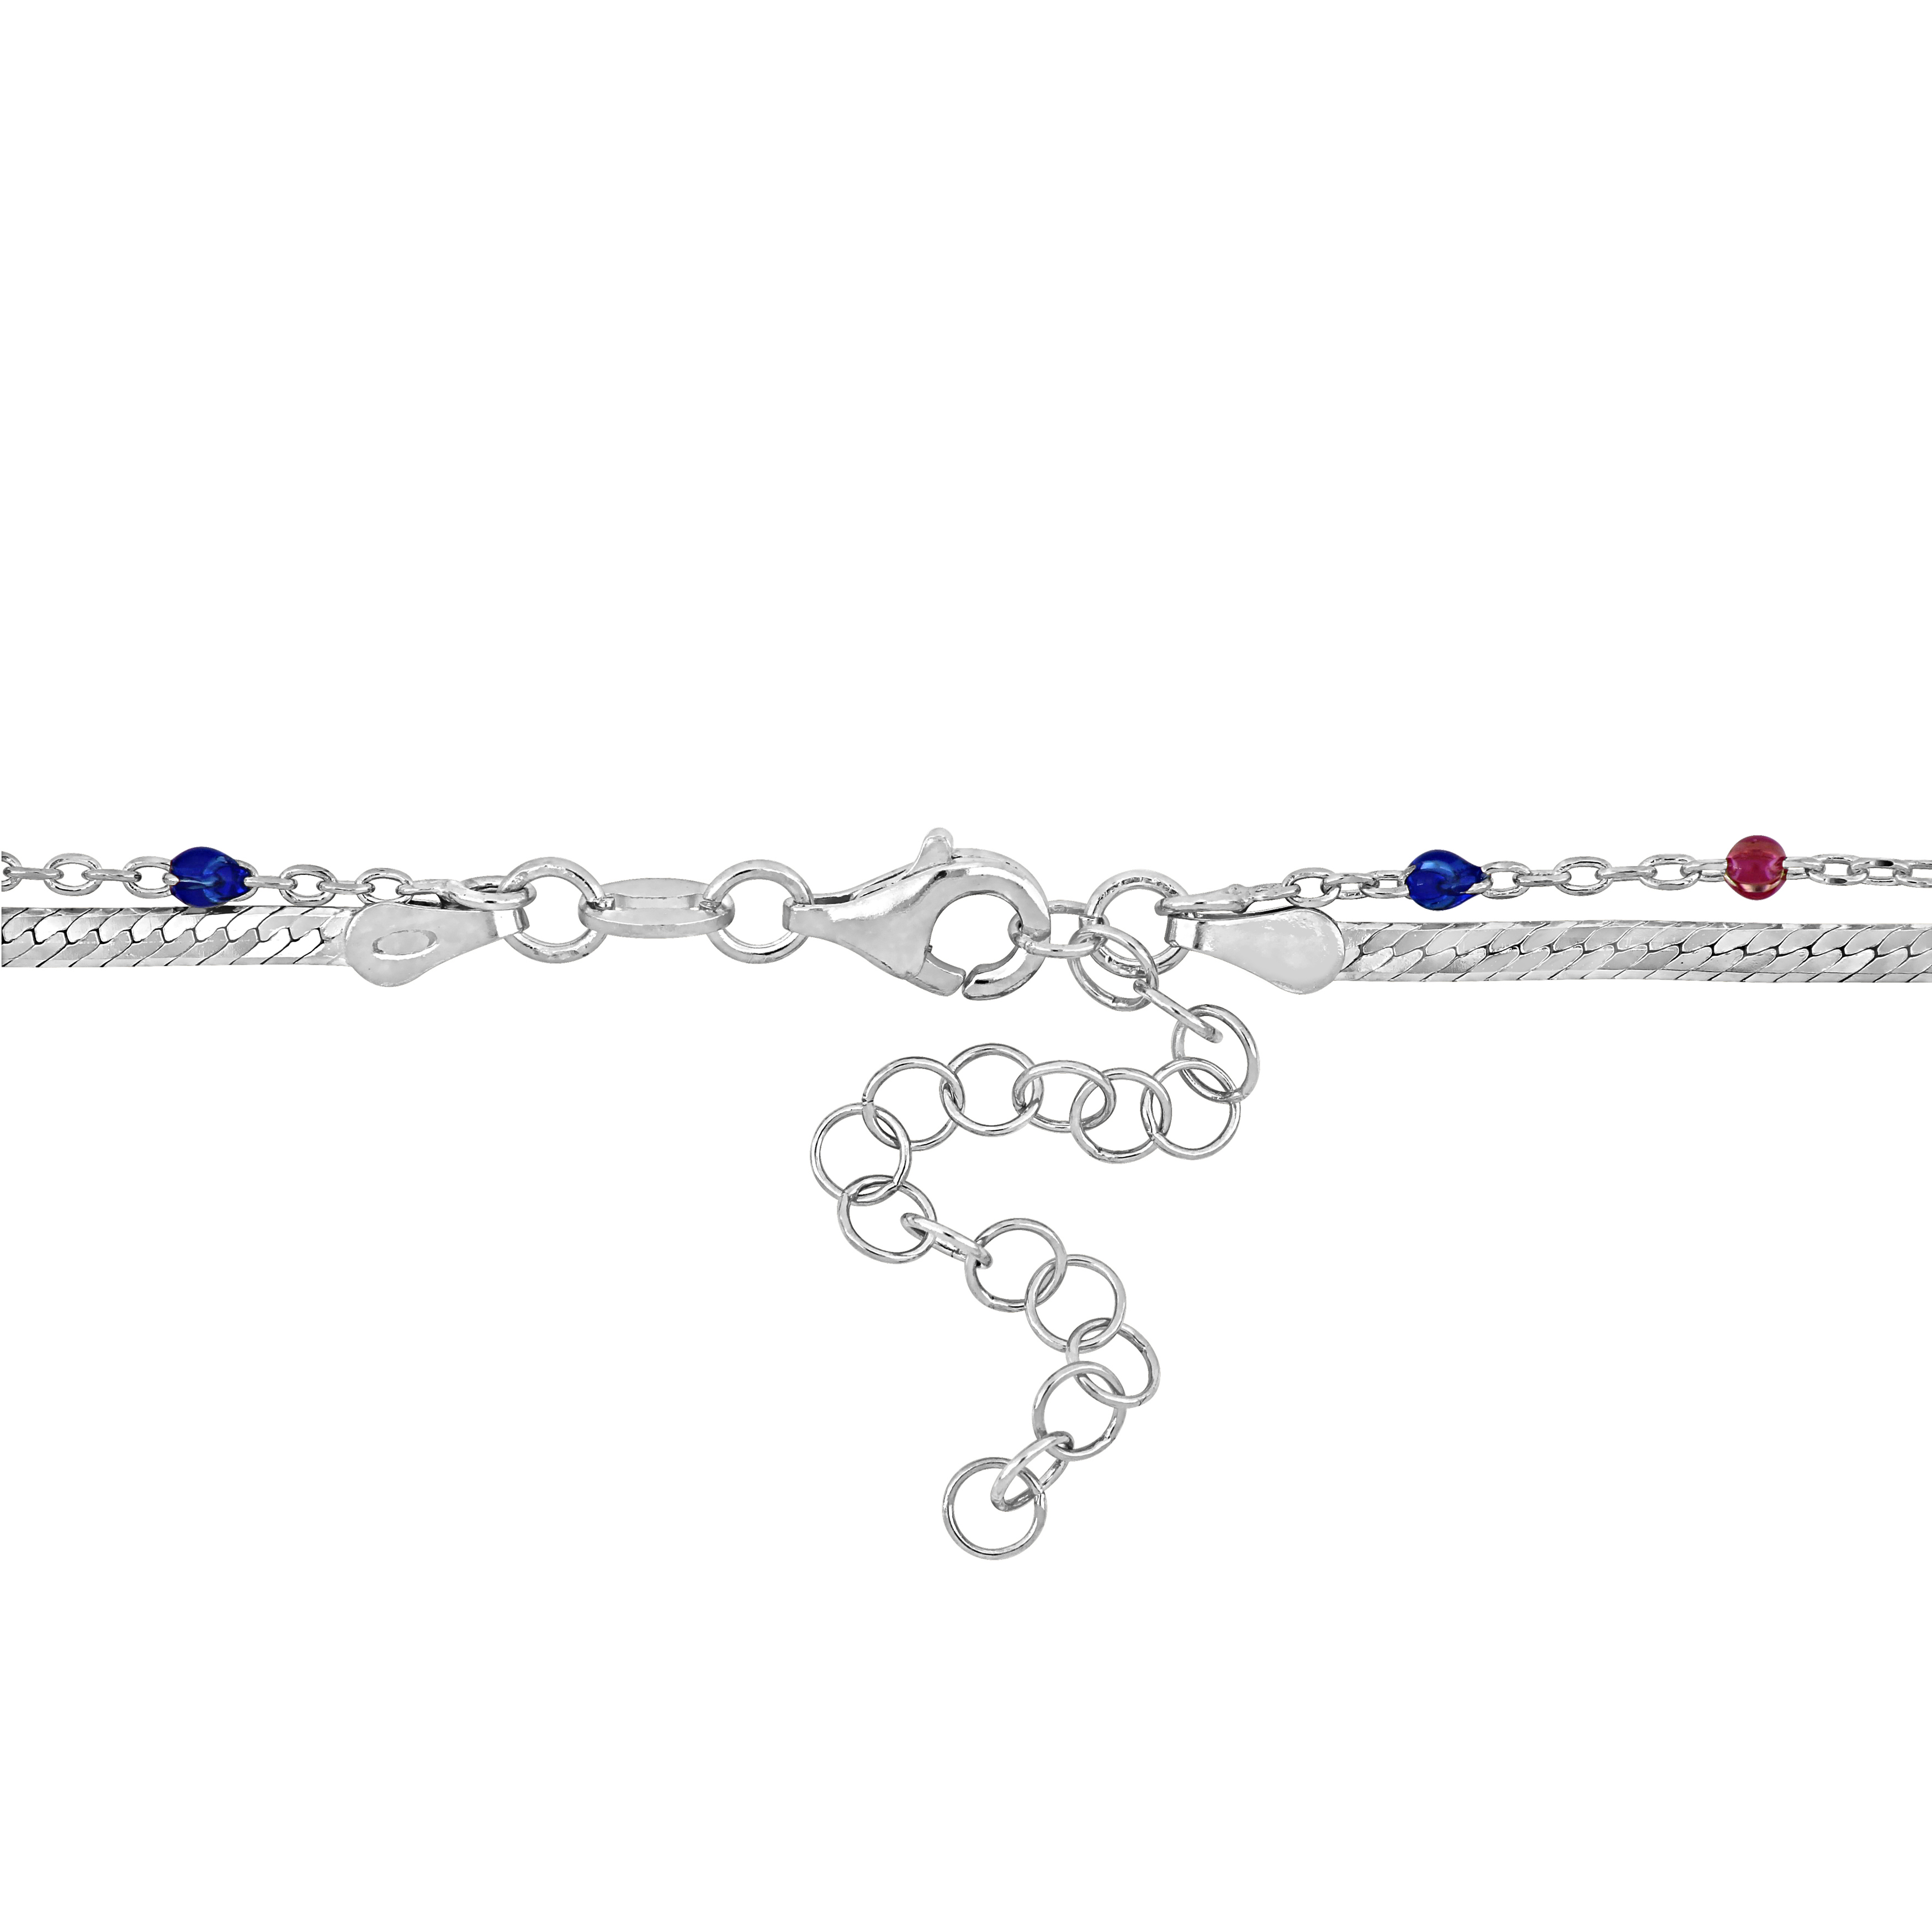 Multi-Color Bead Double Strand Herringbone Necklace in Sterling Silver - 15+2 in.